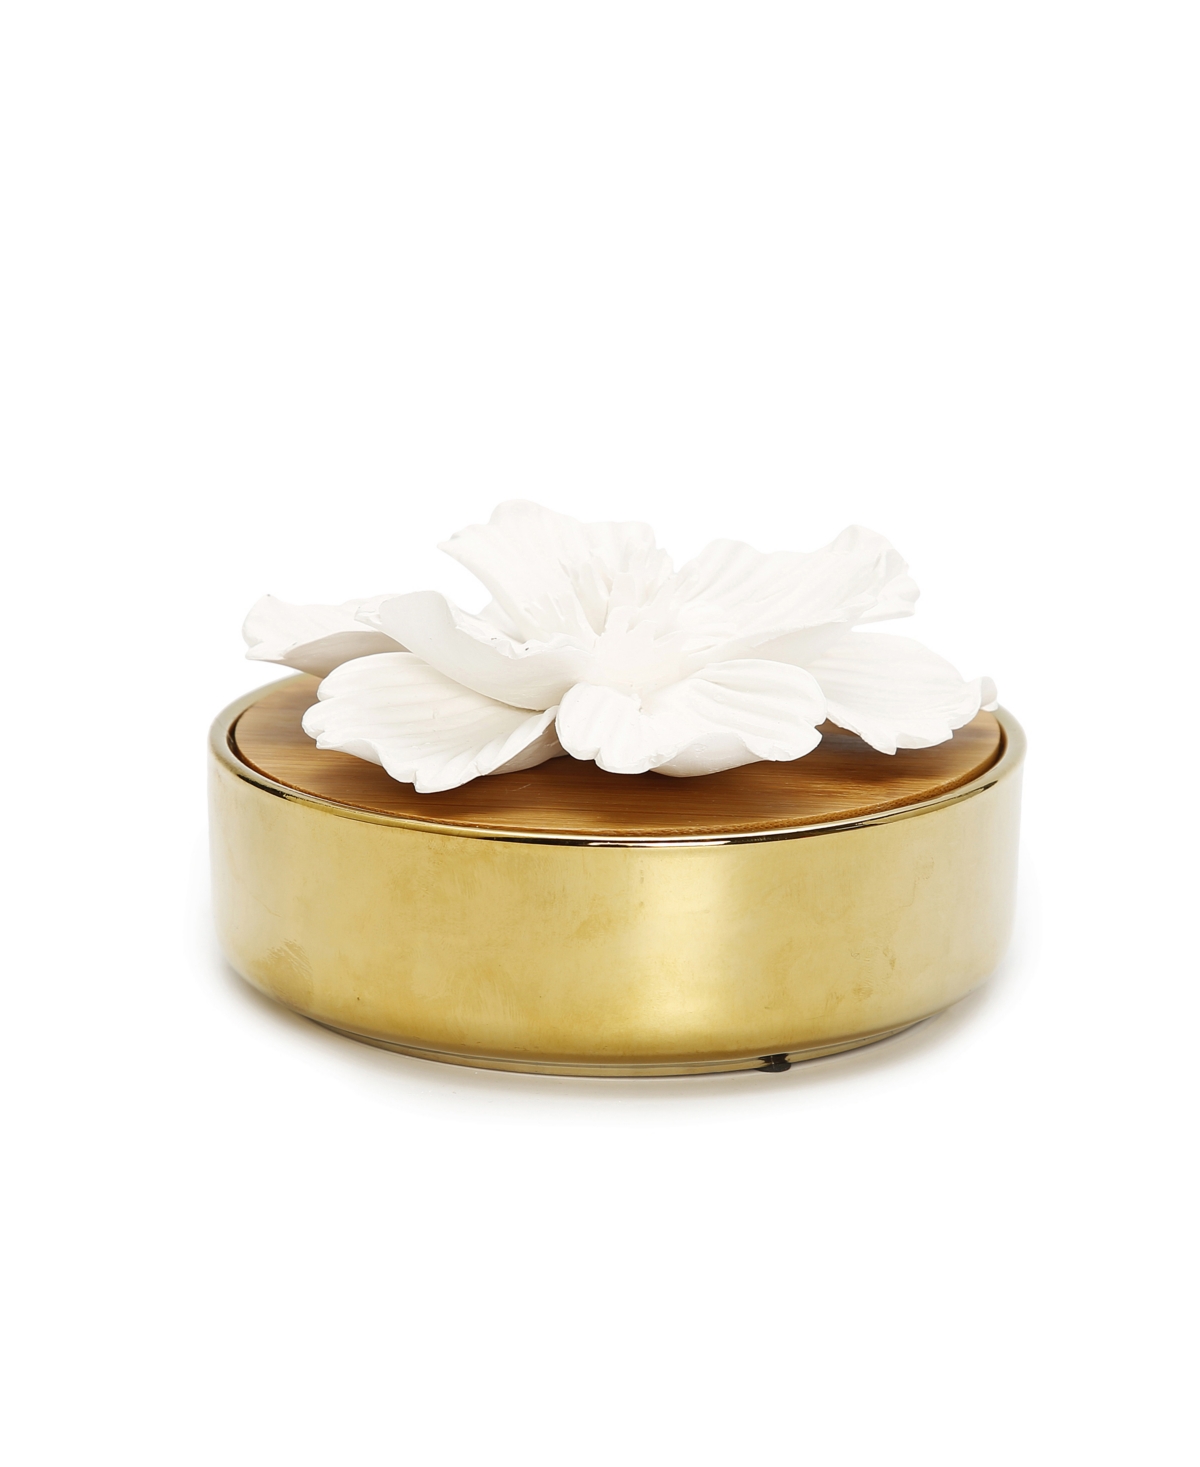 Glossy Hemispheric Shaped Diffuser with Flower, 'English Pear Freesia' Scent - Gold